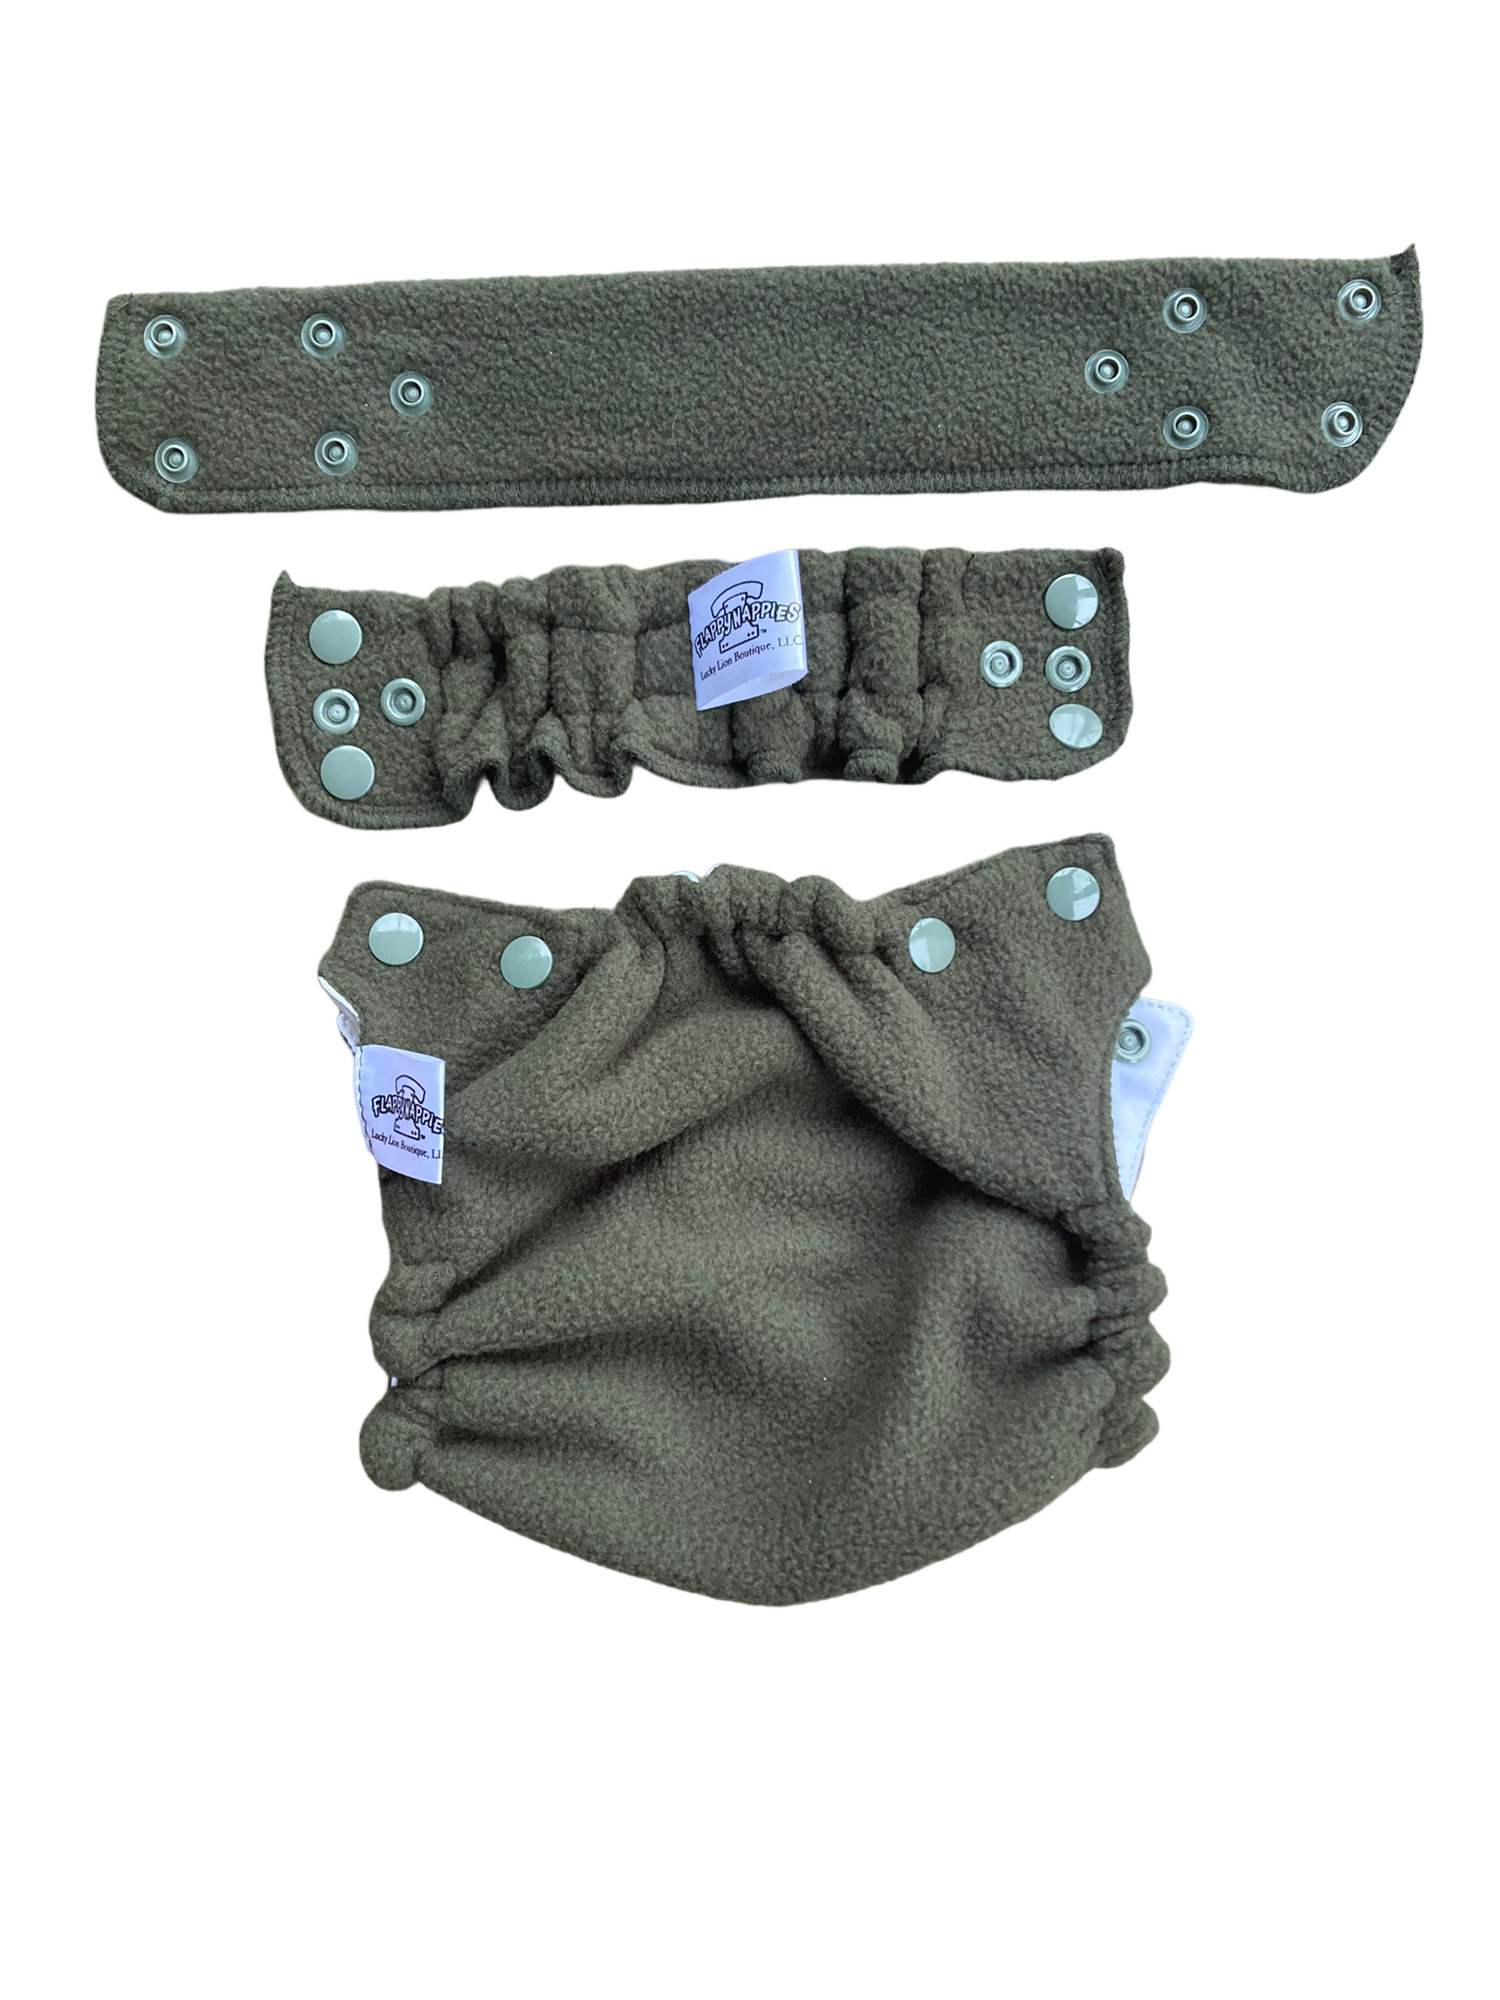 Evergreen Fleece All-In-Two Flappy-Nappy Diaper Cover